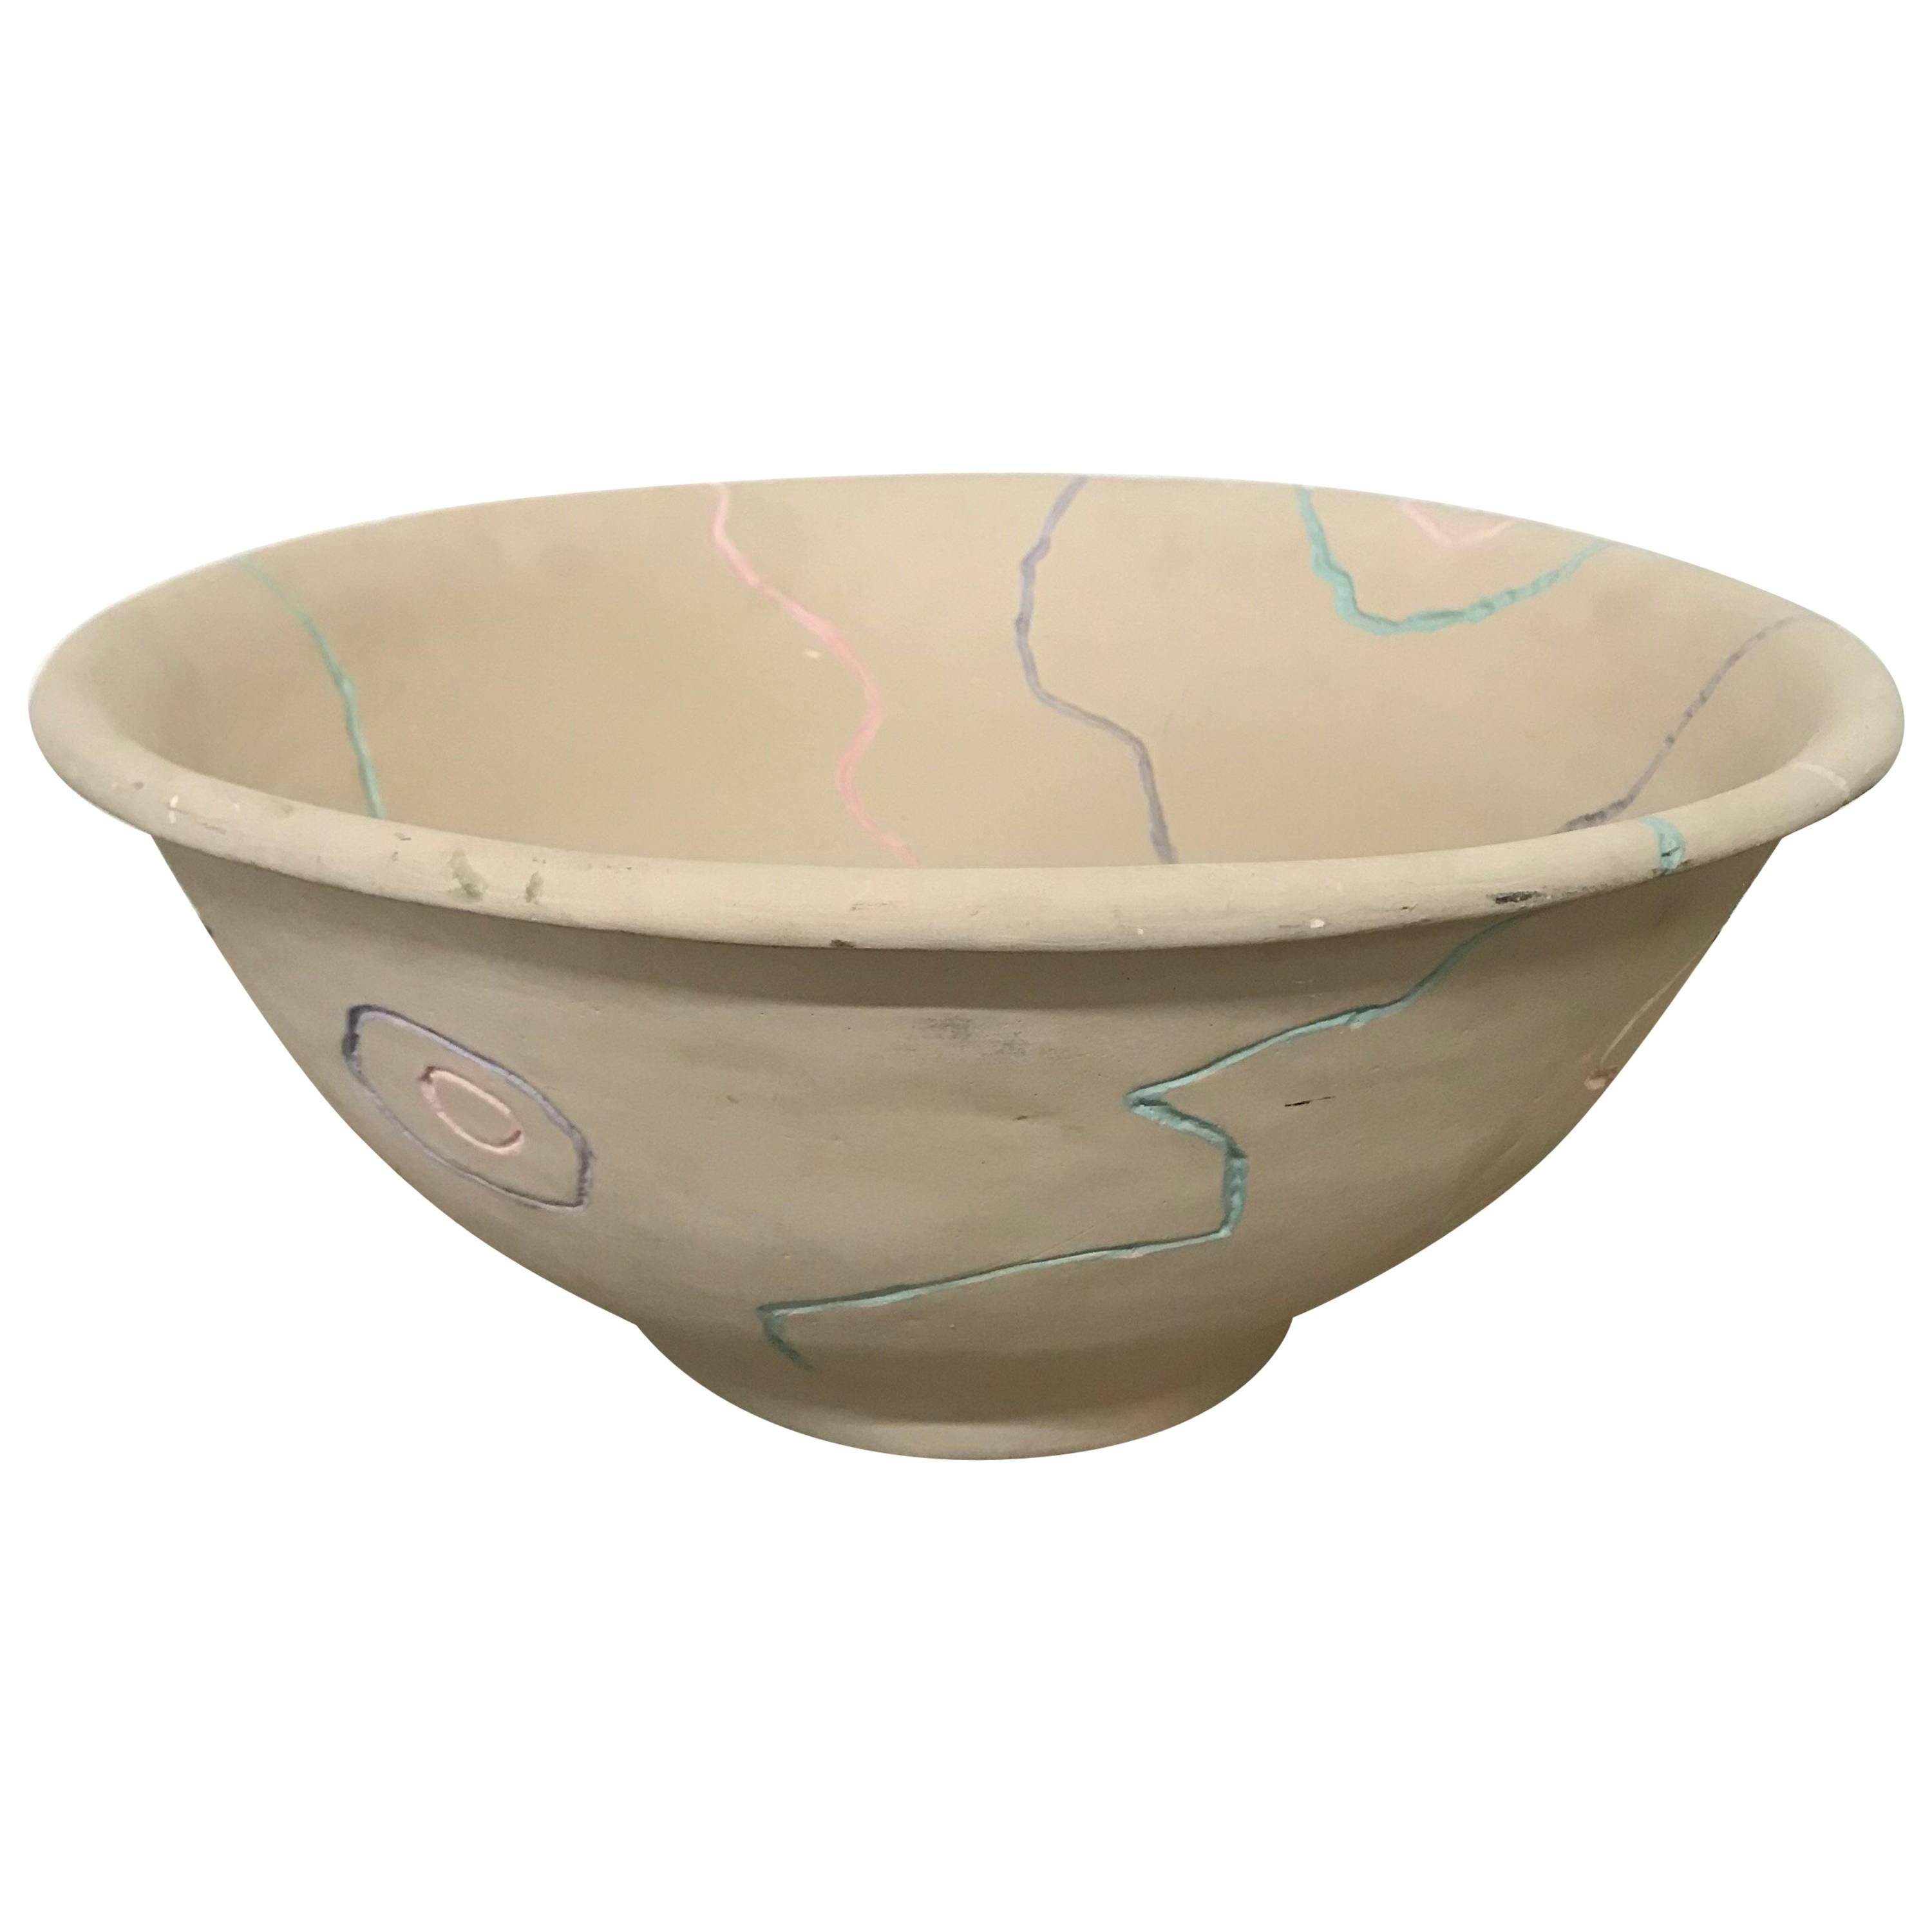 Postmodern Pottery Centrepiece Bowl or Fruit Bowl